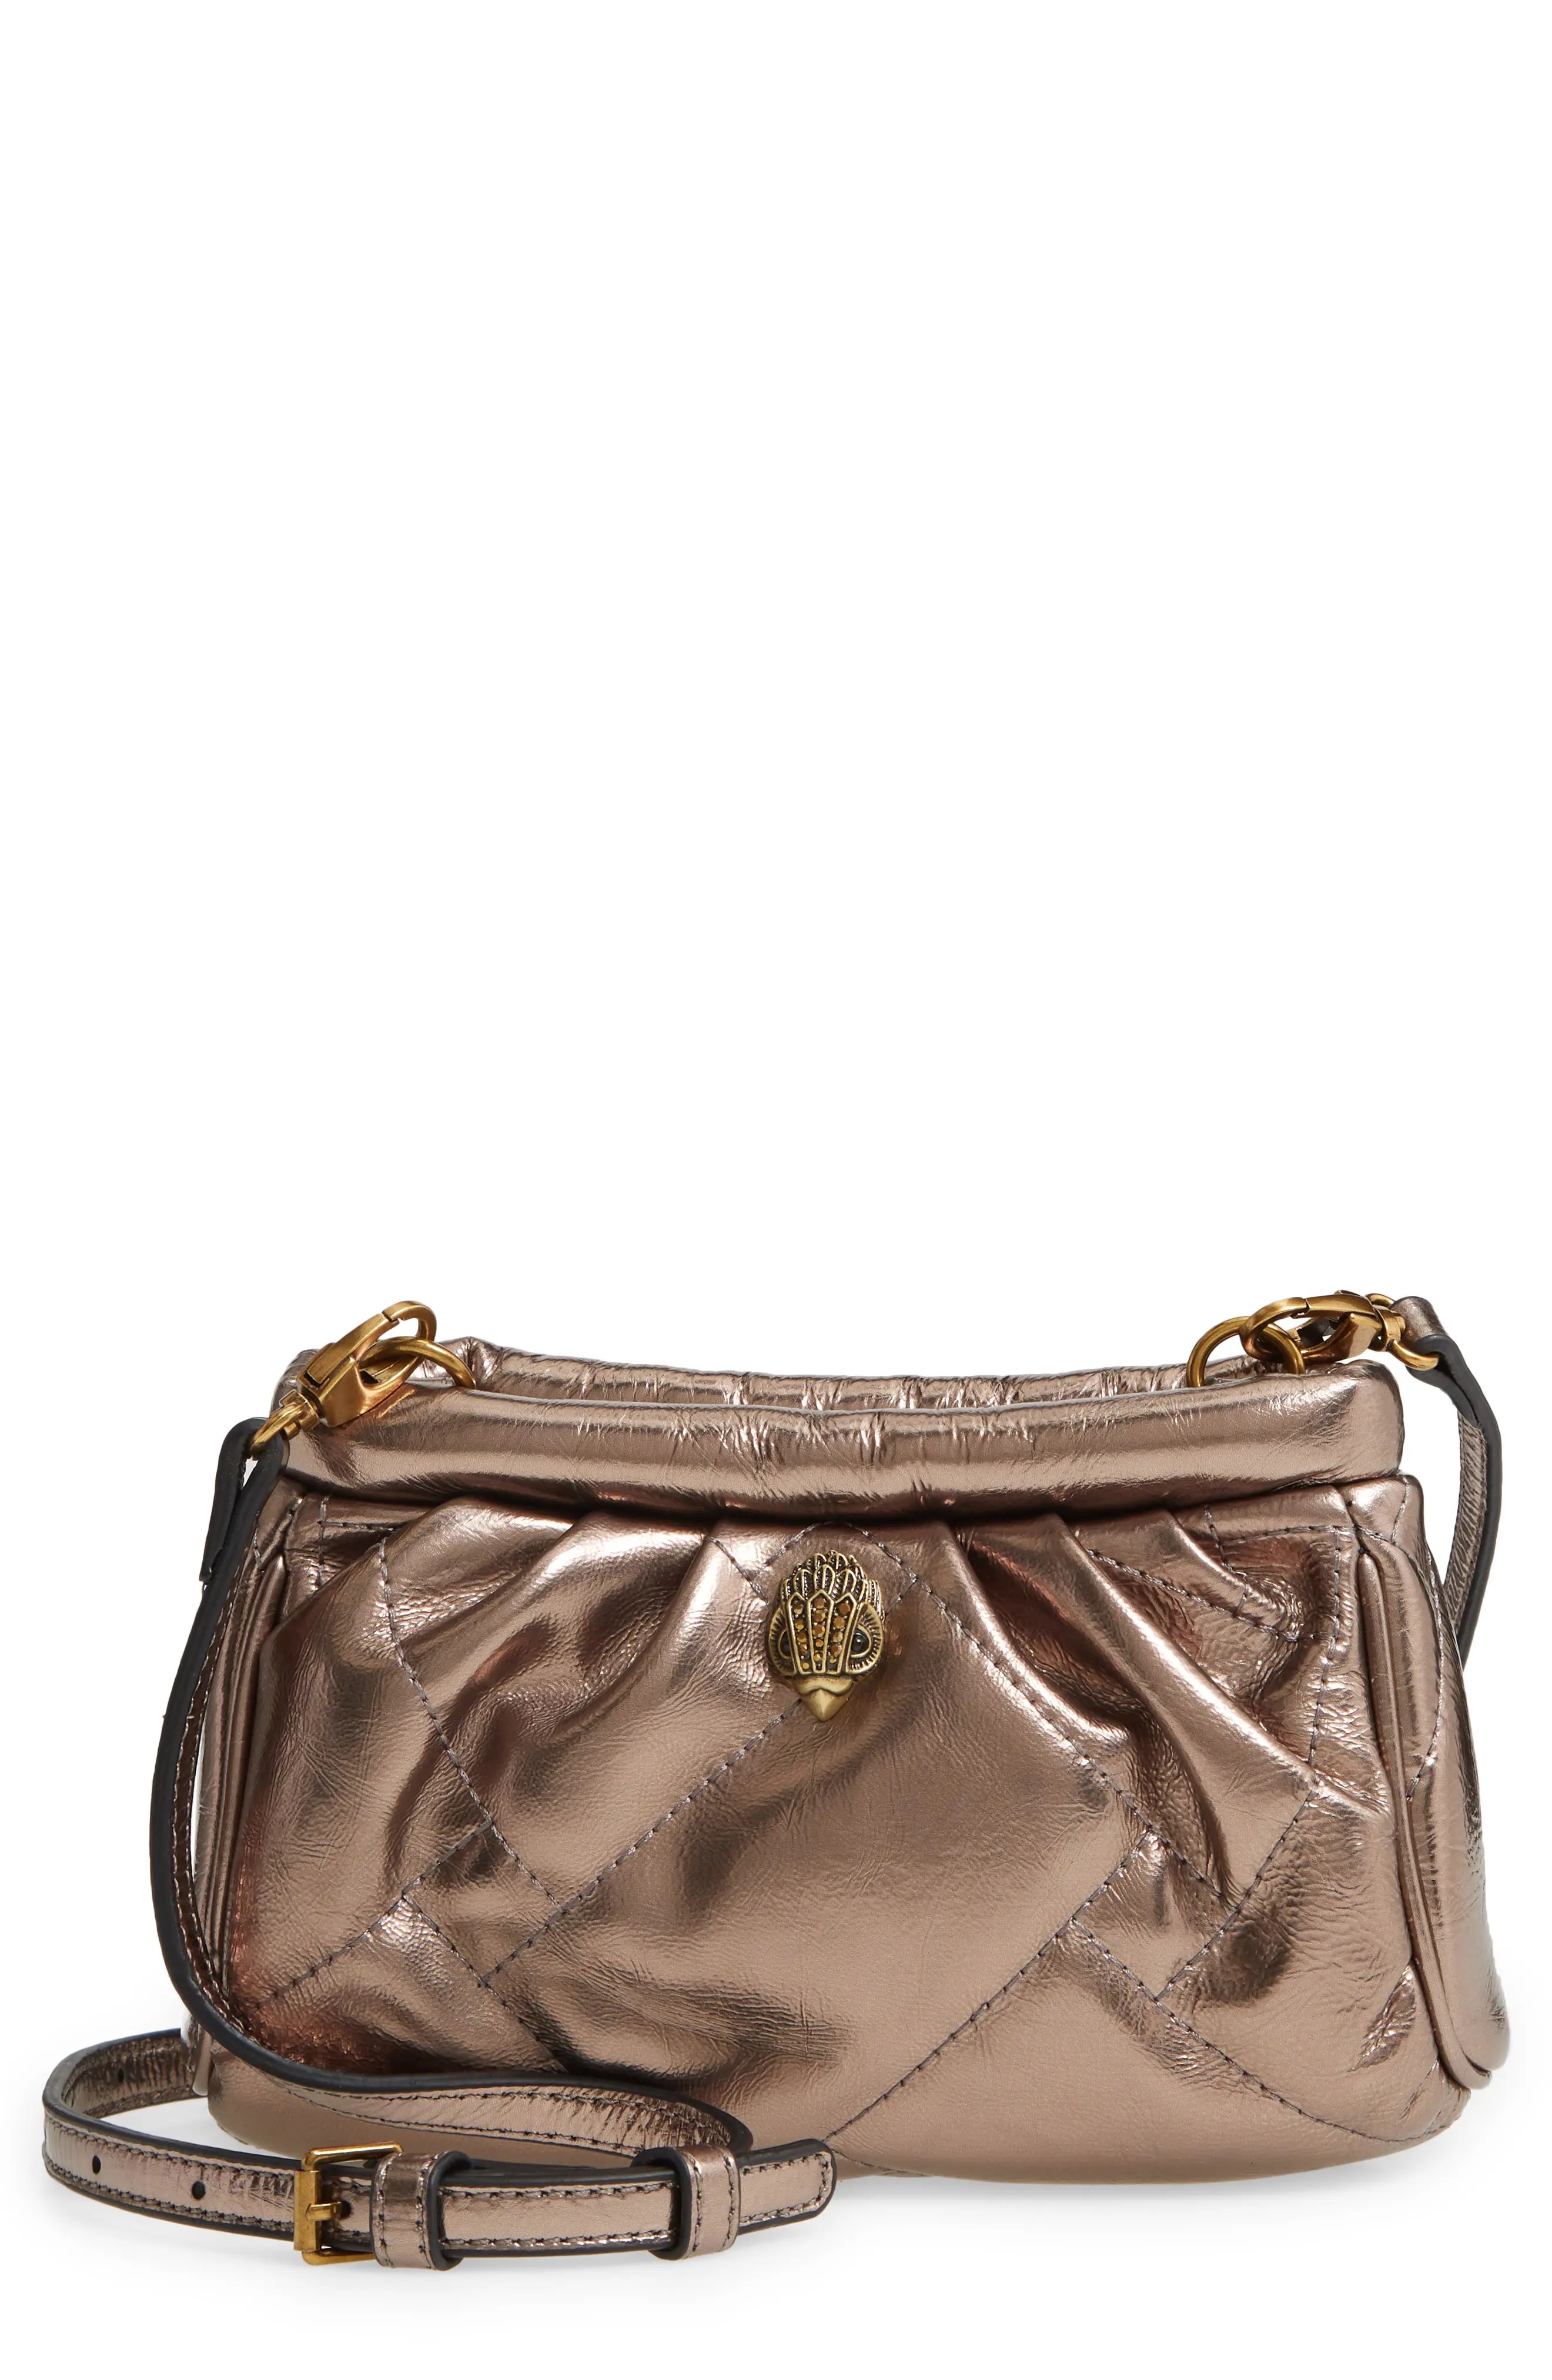 Kurt Geiger London Kensington Quilted Leather Clutch in Rust/Copper at Nordstrom | Nordstrom